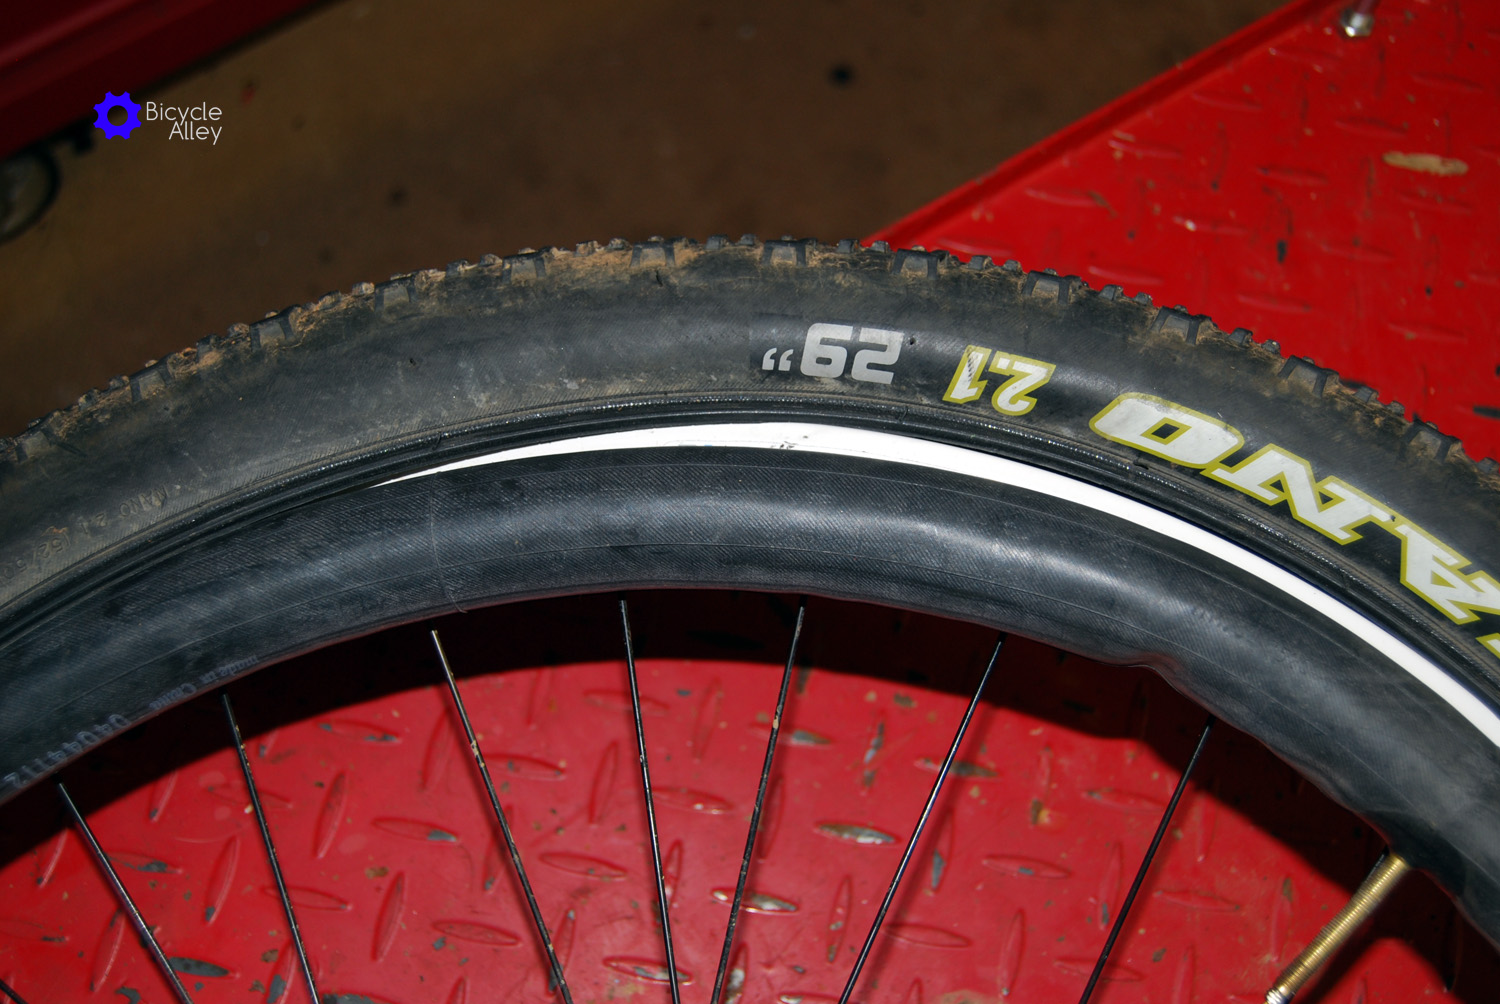 Remove tube from tire and rim